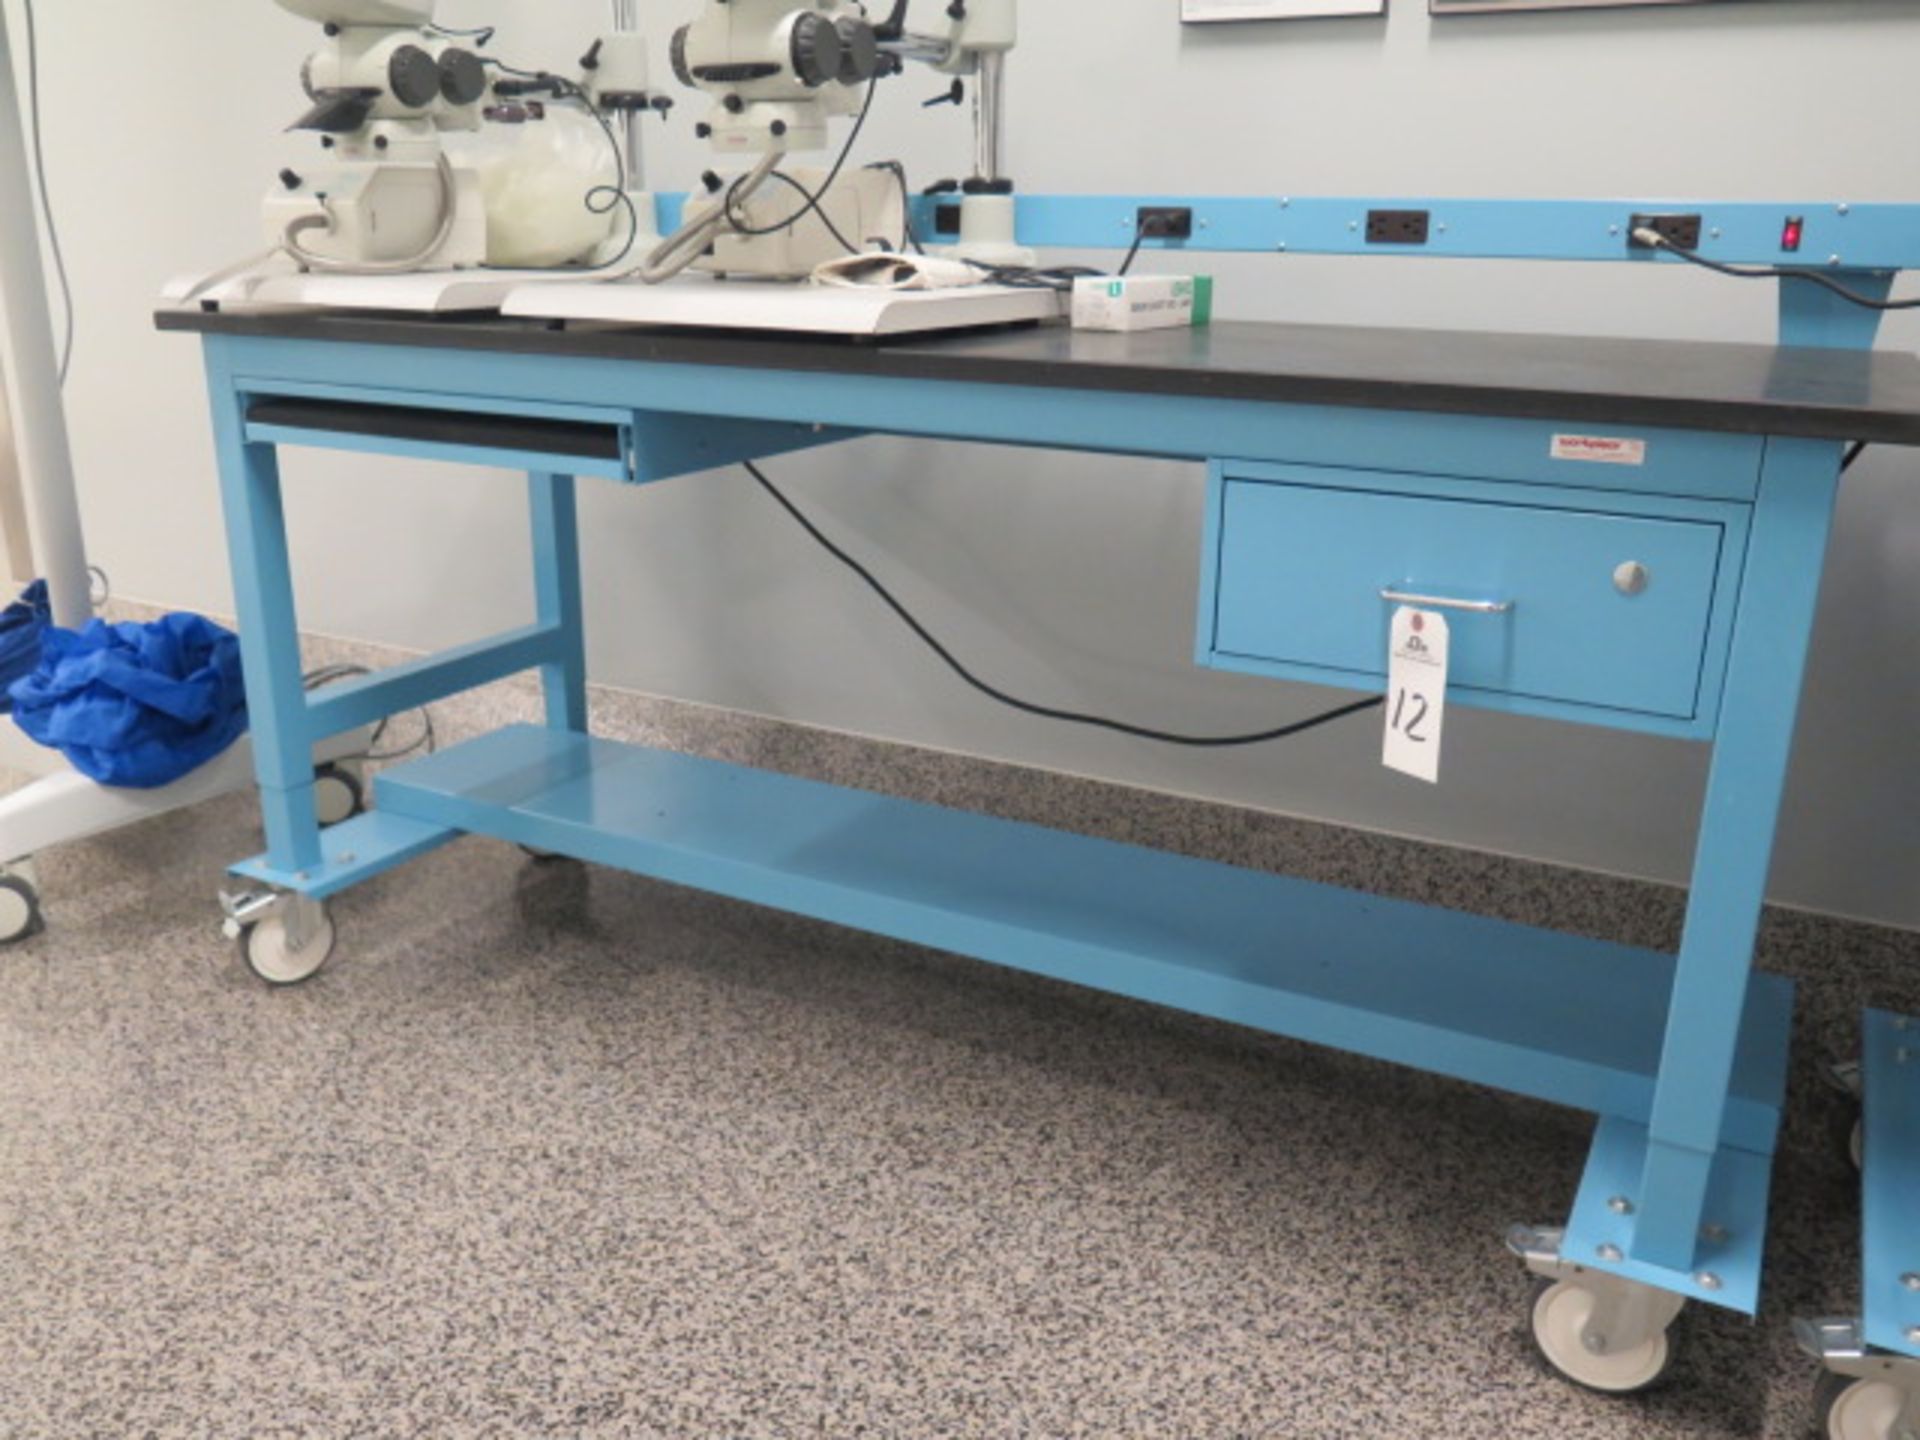 Workplace Modular Bench Systems 24" x 72" Rolling Lab Bench w/ Acid Proof Top | Loading Price: $25